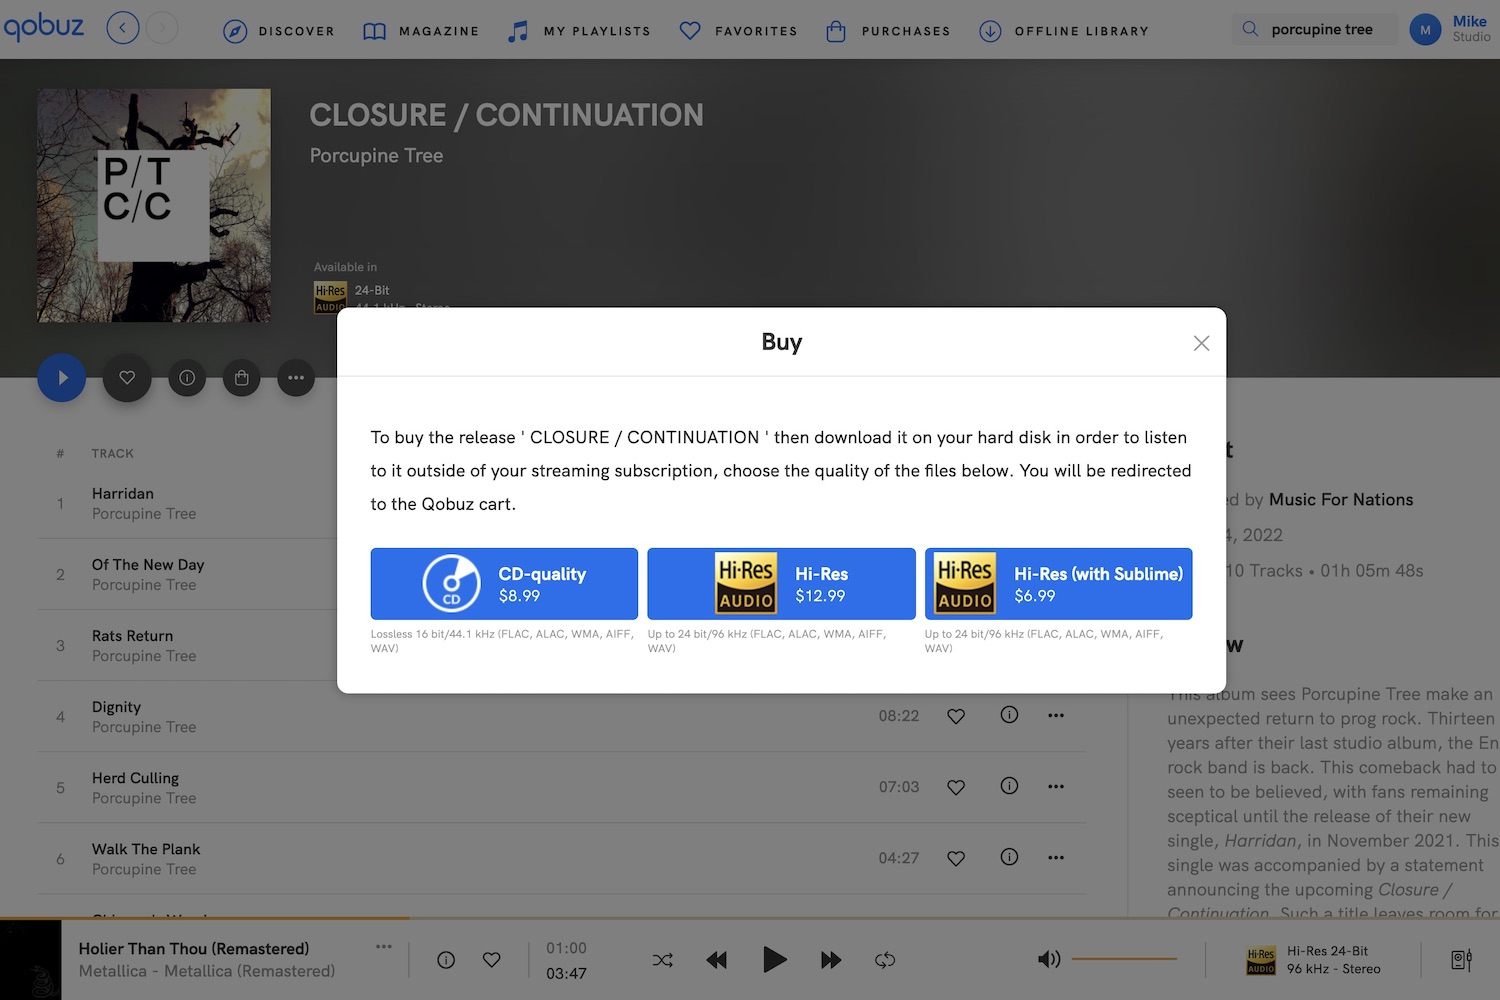 The download confirmation prompt you'll see when you purchase music through Qobuz.